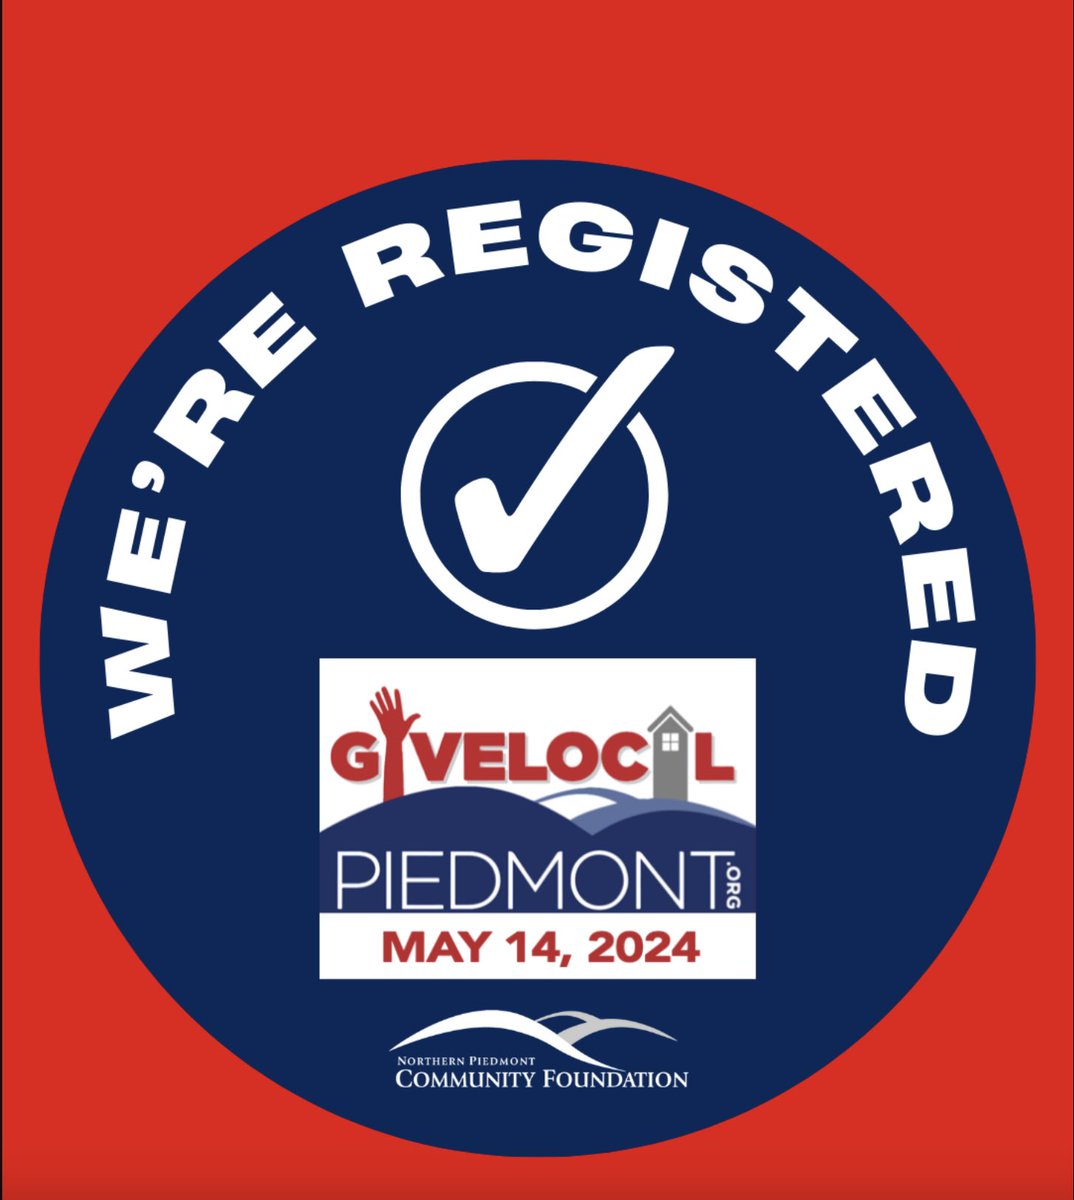 #GiveLocal Piedmont is TOMORROW & we have a donor MATCHING all donations to Morgan's Message up to the first $10K! This yearly event, local to the region of VA where Morgan Rodgers was born & raised, marks a special opportunity to uplift our cause. 🦋 givelocalpiedmont.org/organization/M…